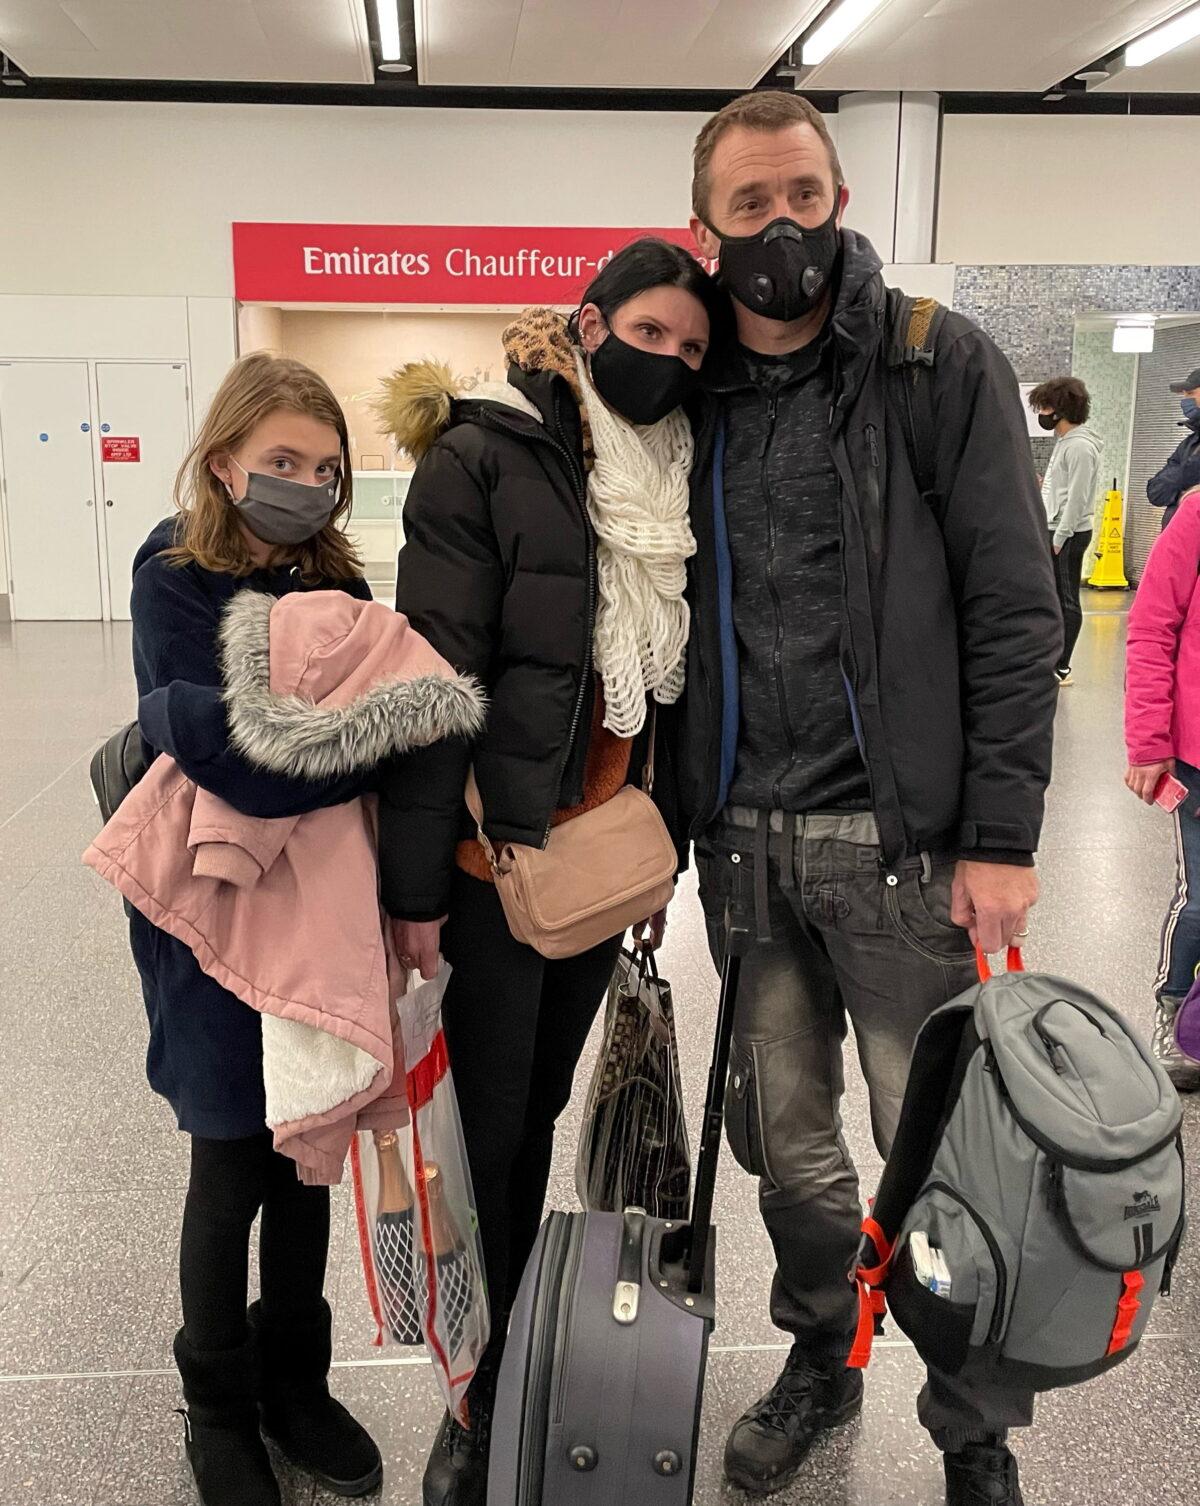 Paul Meakin, his wife Svetlana, and their daughter arrive at the Gatwick airport in London from Kyiv, Ukraine, on Feb. 12, 2022. (Sophie Wingate/PA)